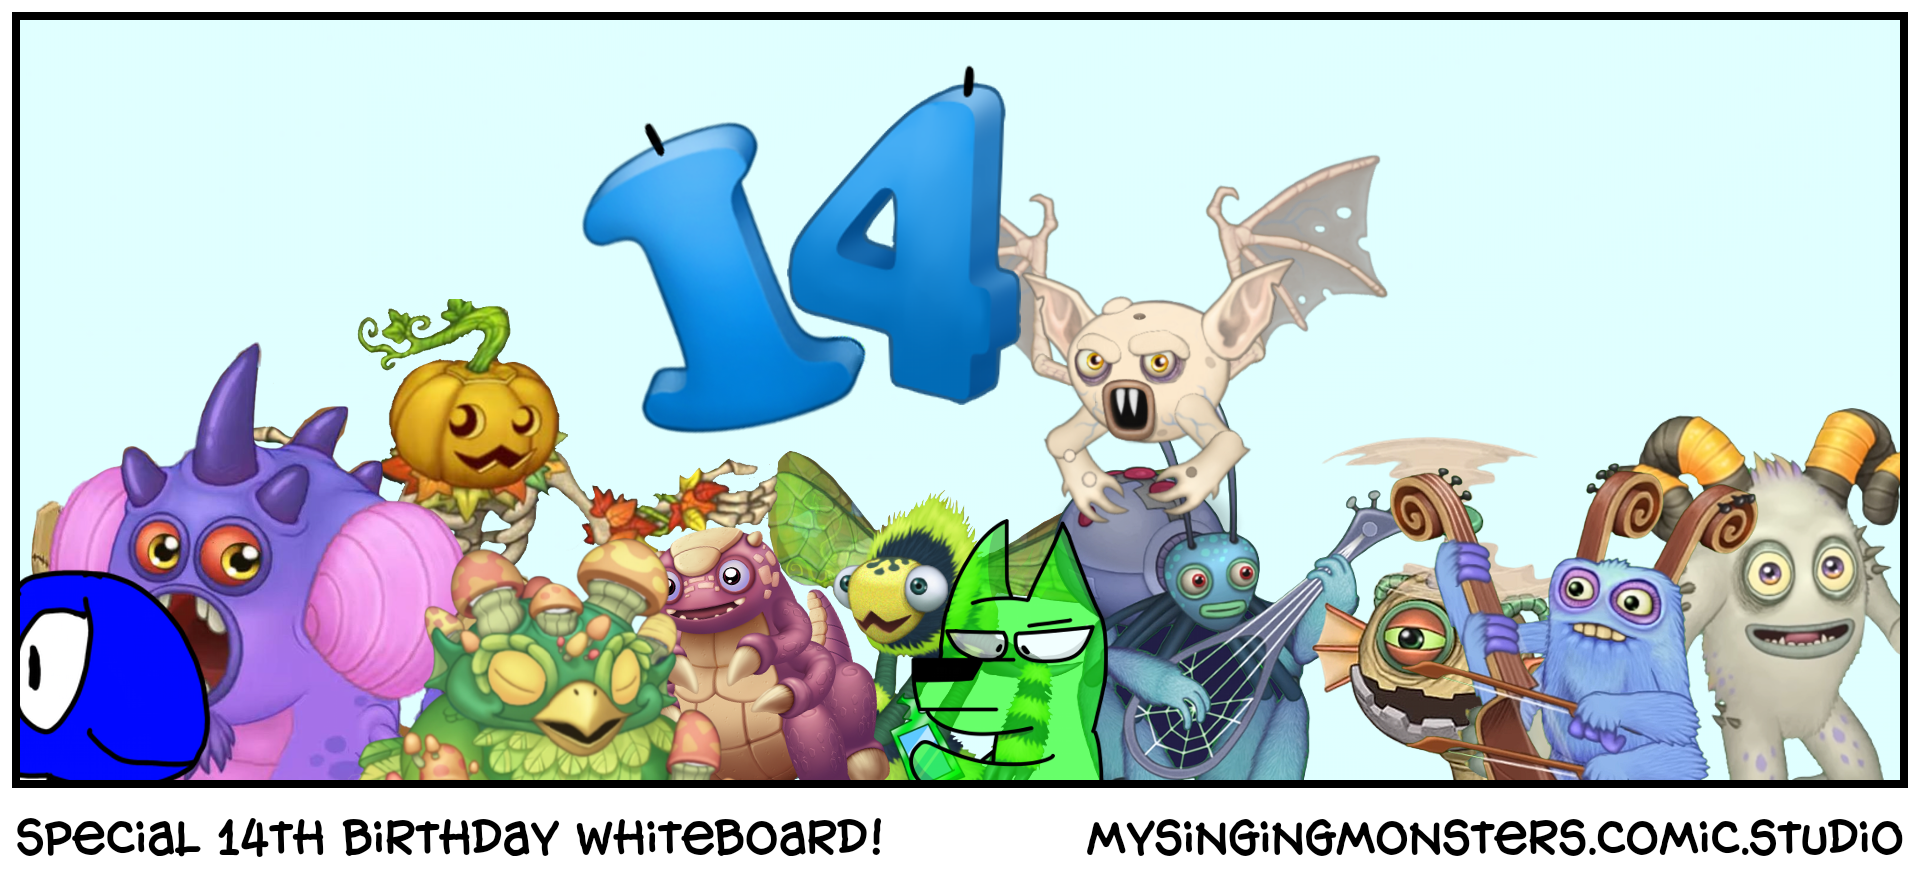 Special 14th birthday whiteboard!